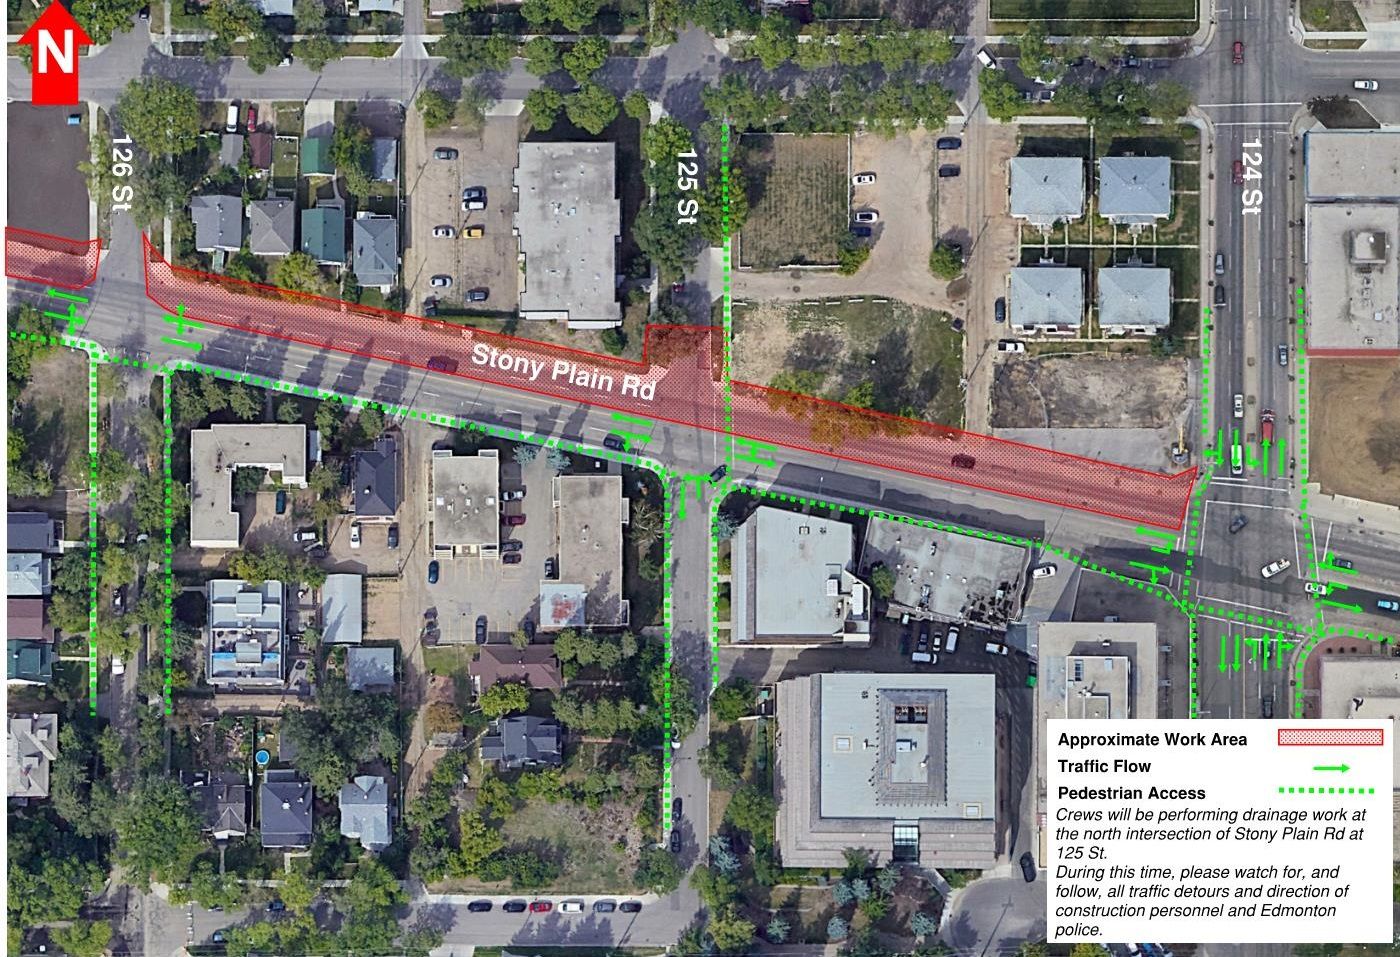 Portion of Stony Plain Road closes for drainage work ahead of west LRT construction